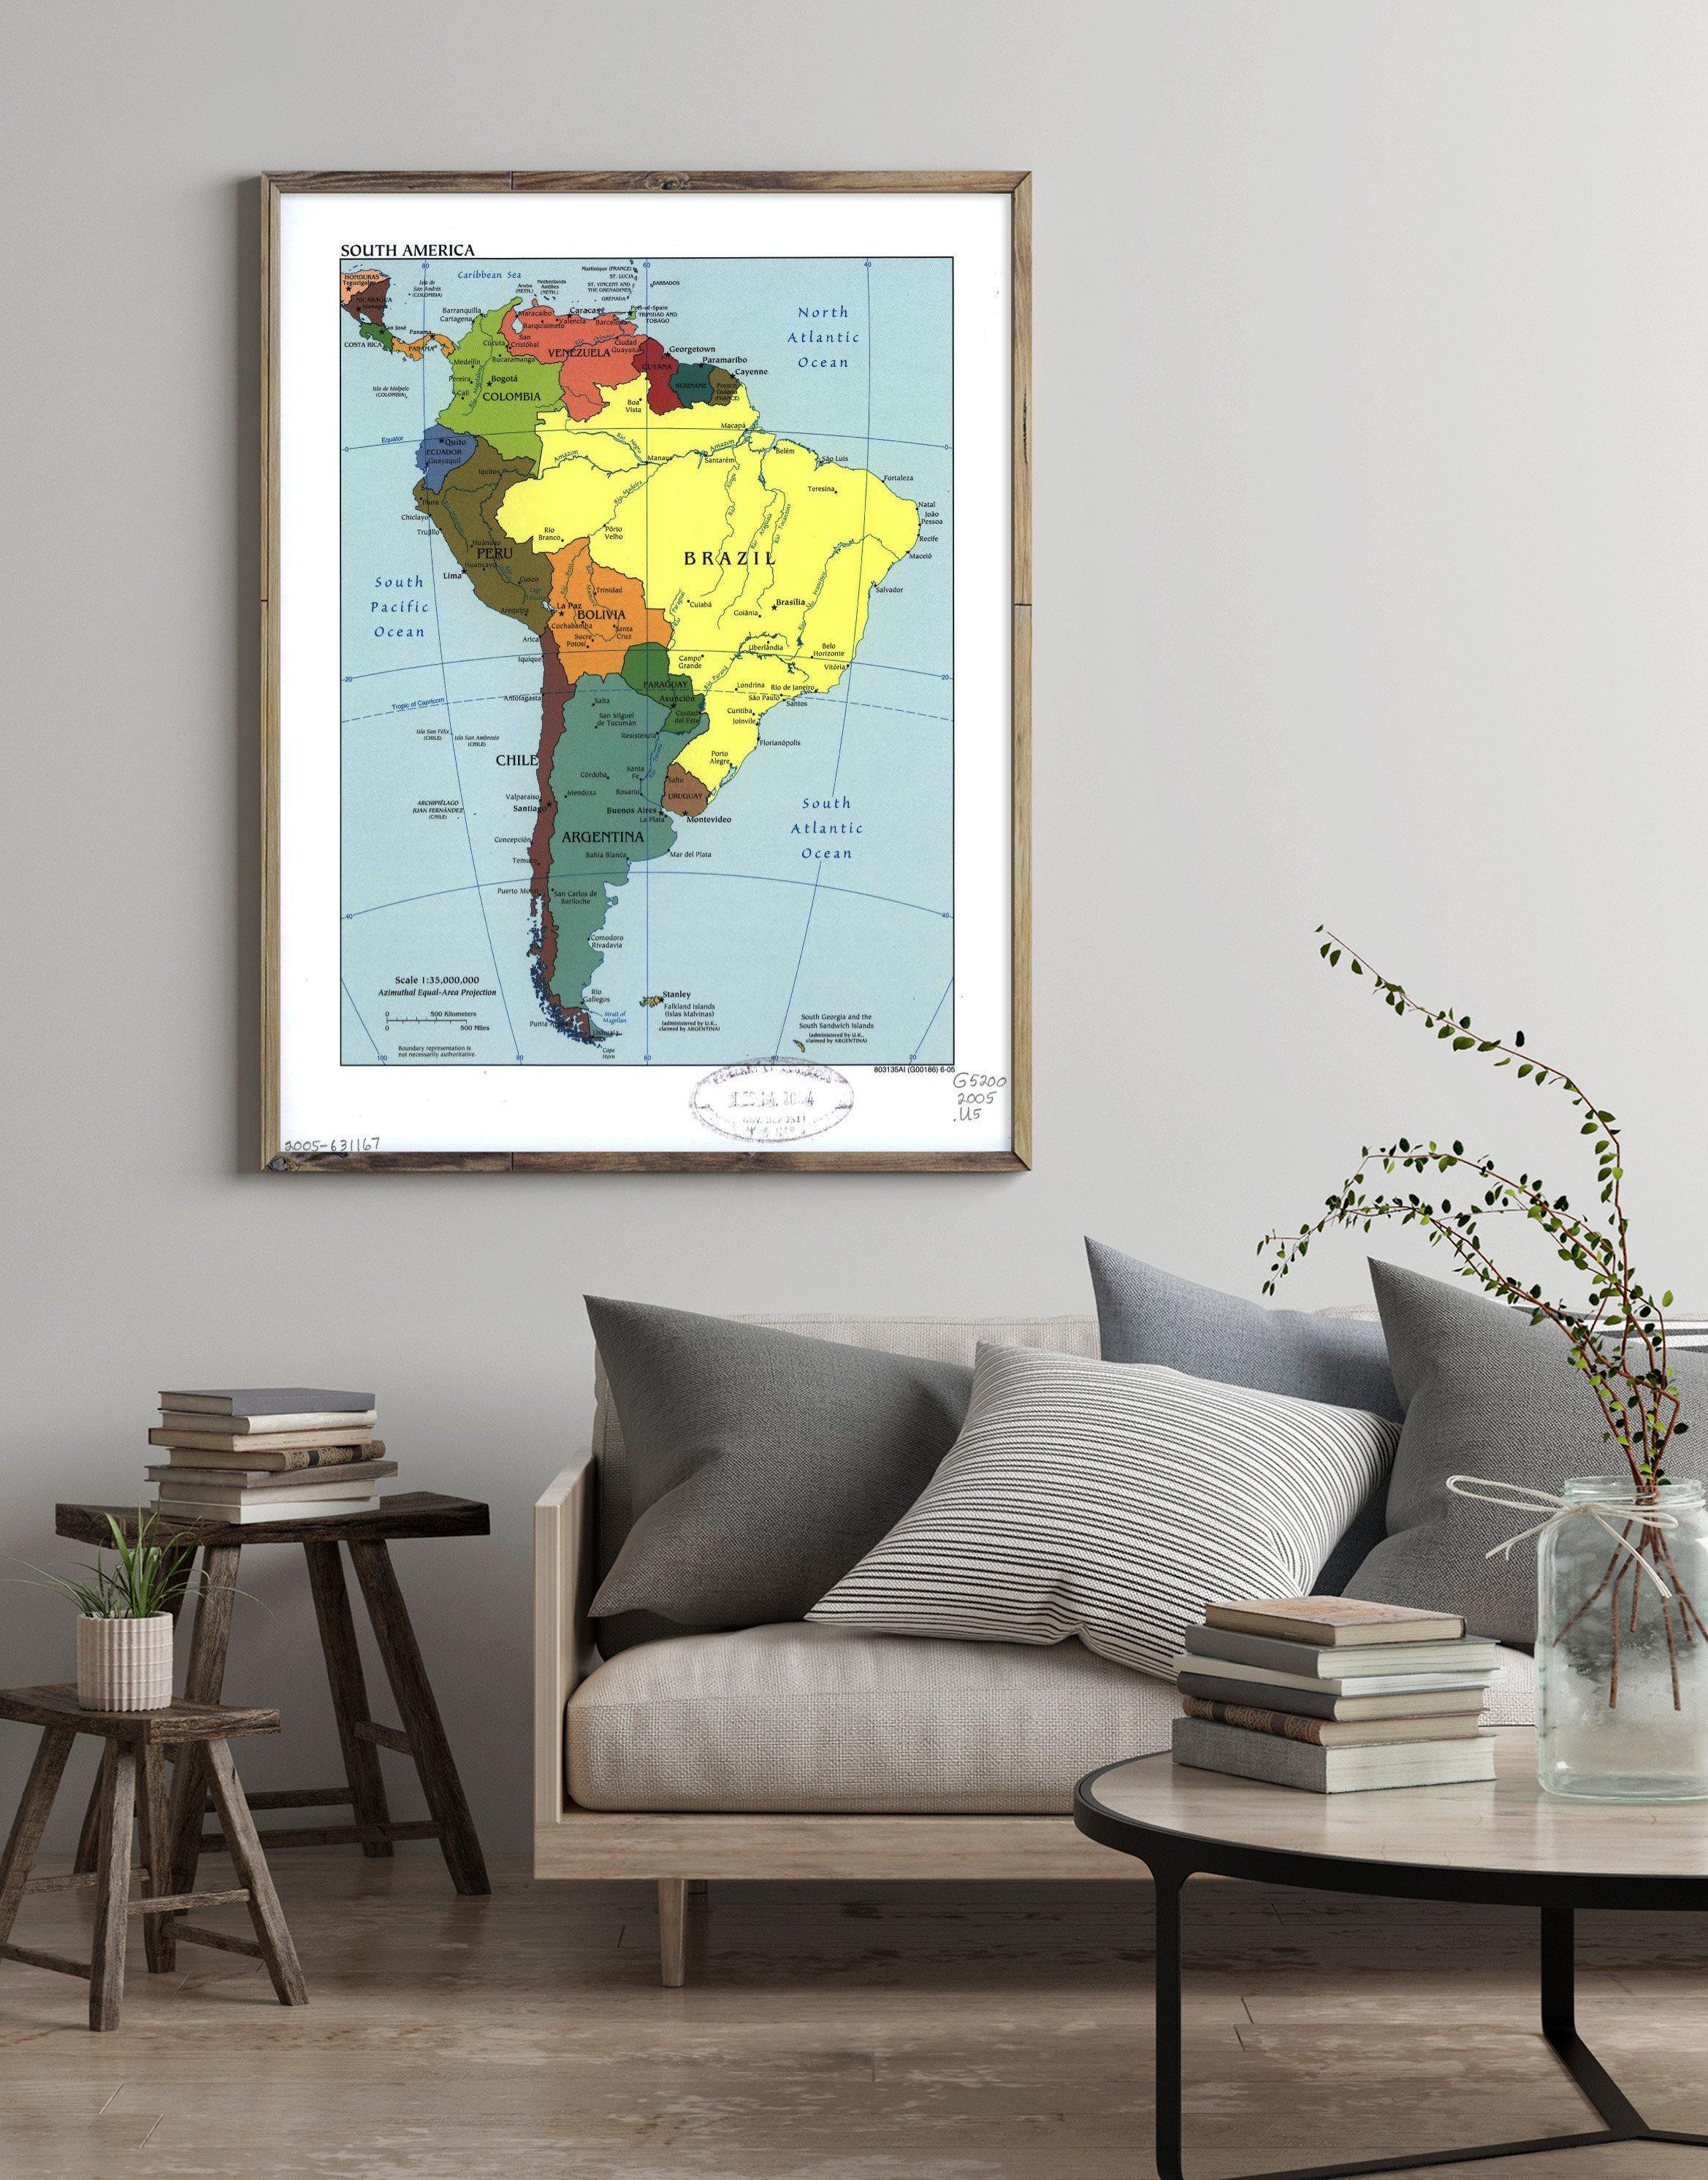 2005 Map| South America| South America Map Size: 18 inches x 24 inches - New York Map Company